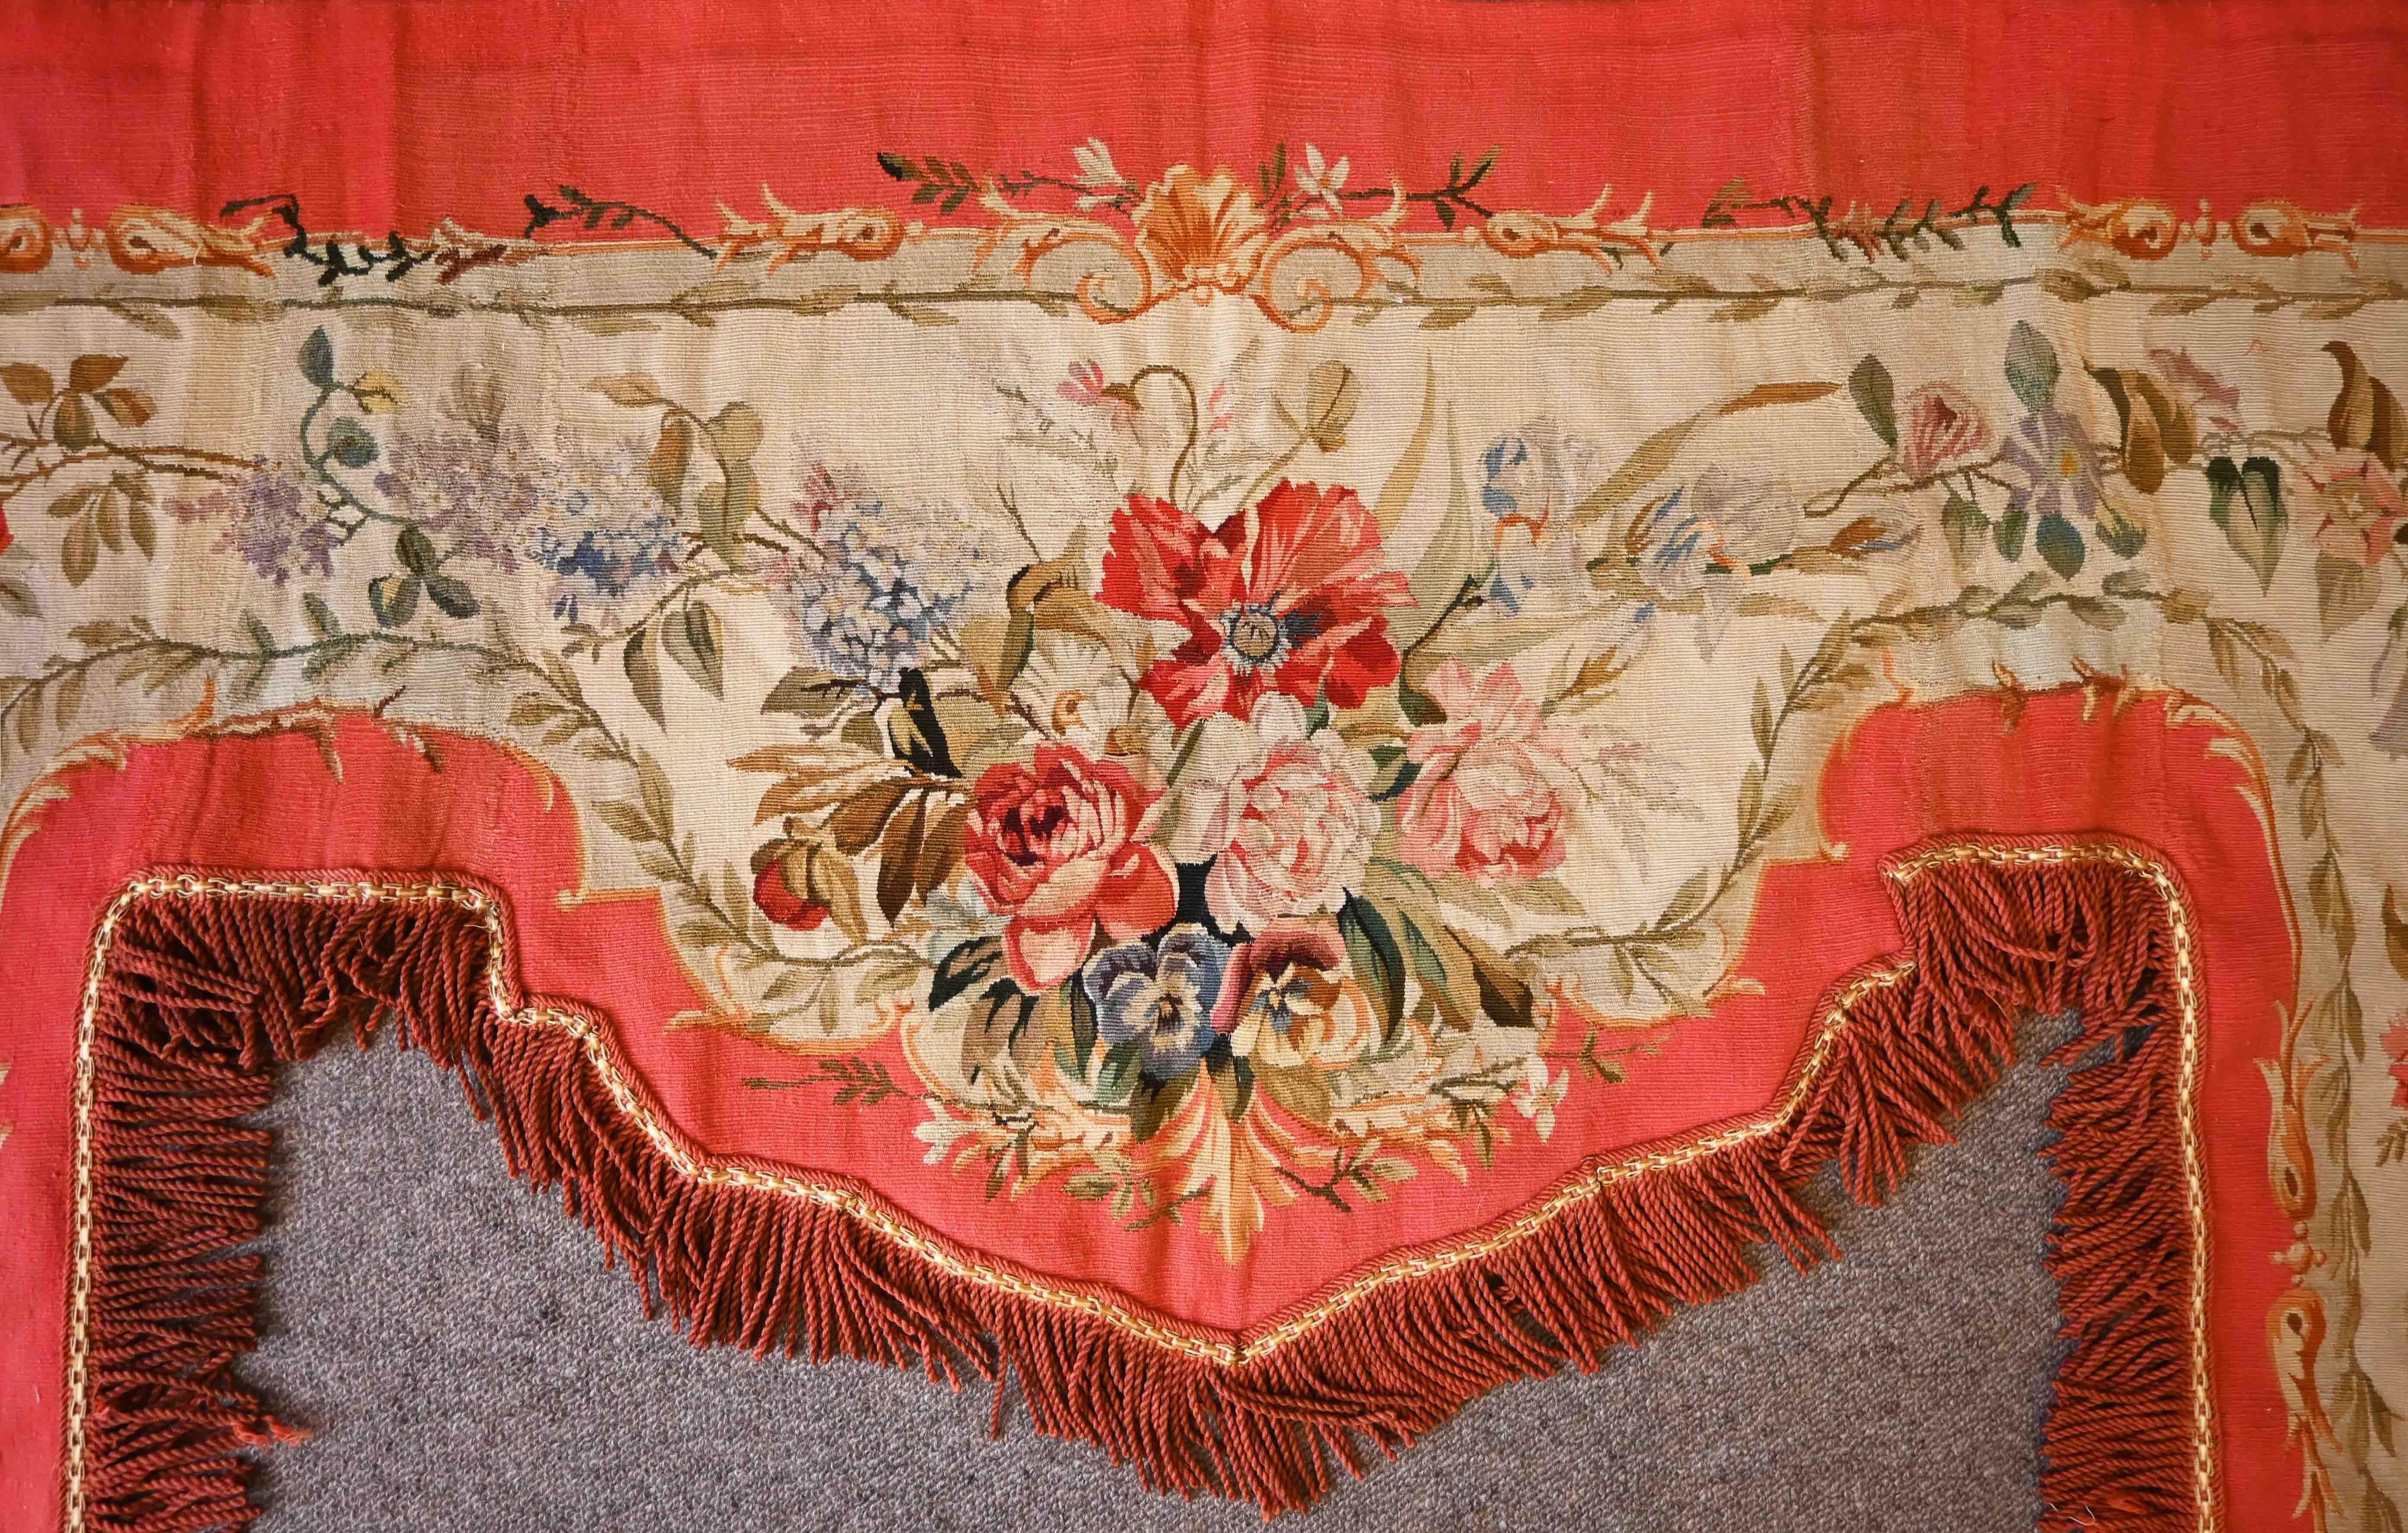 Hand-Woven 19th century Aubusson Tapestry Valance - N° 1350